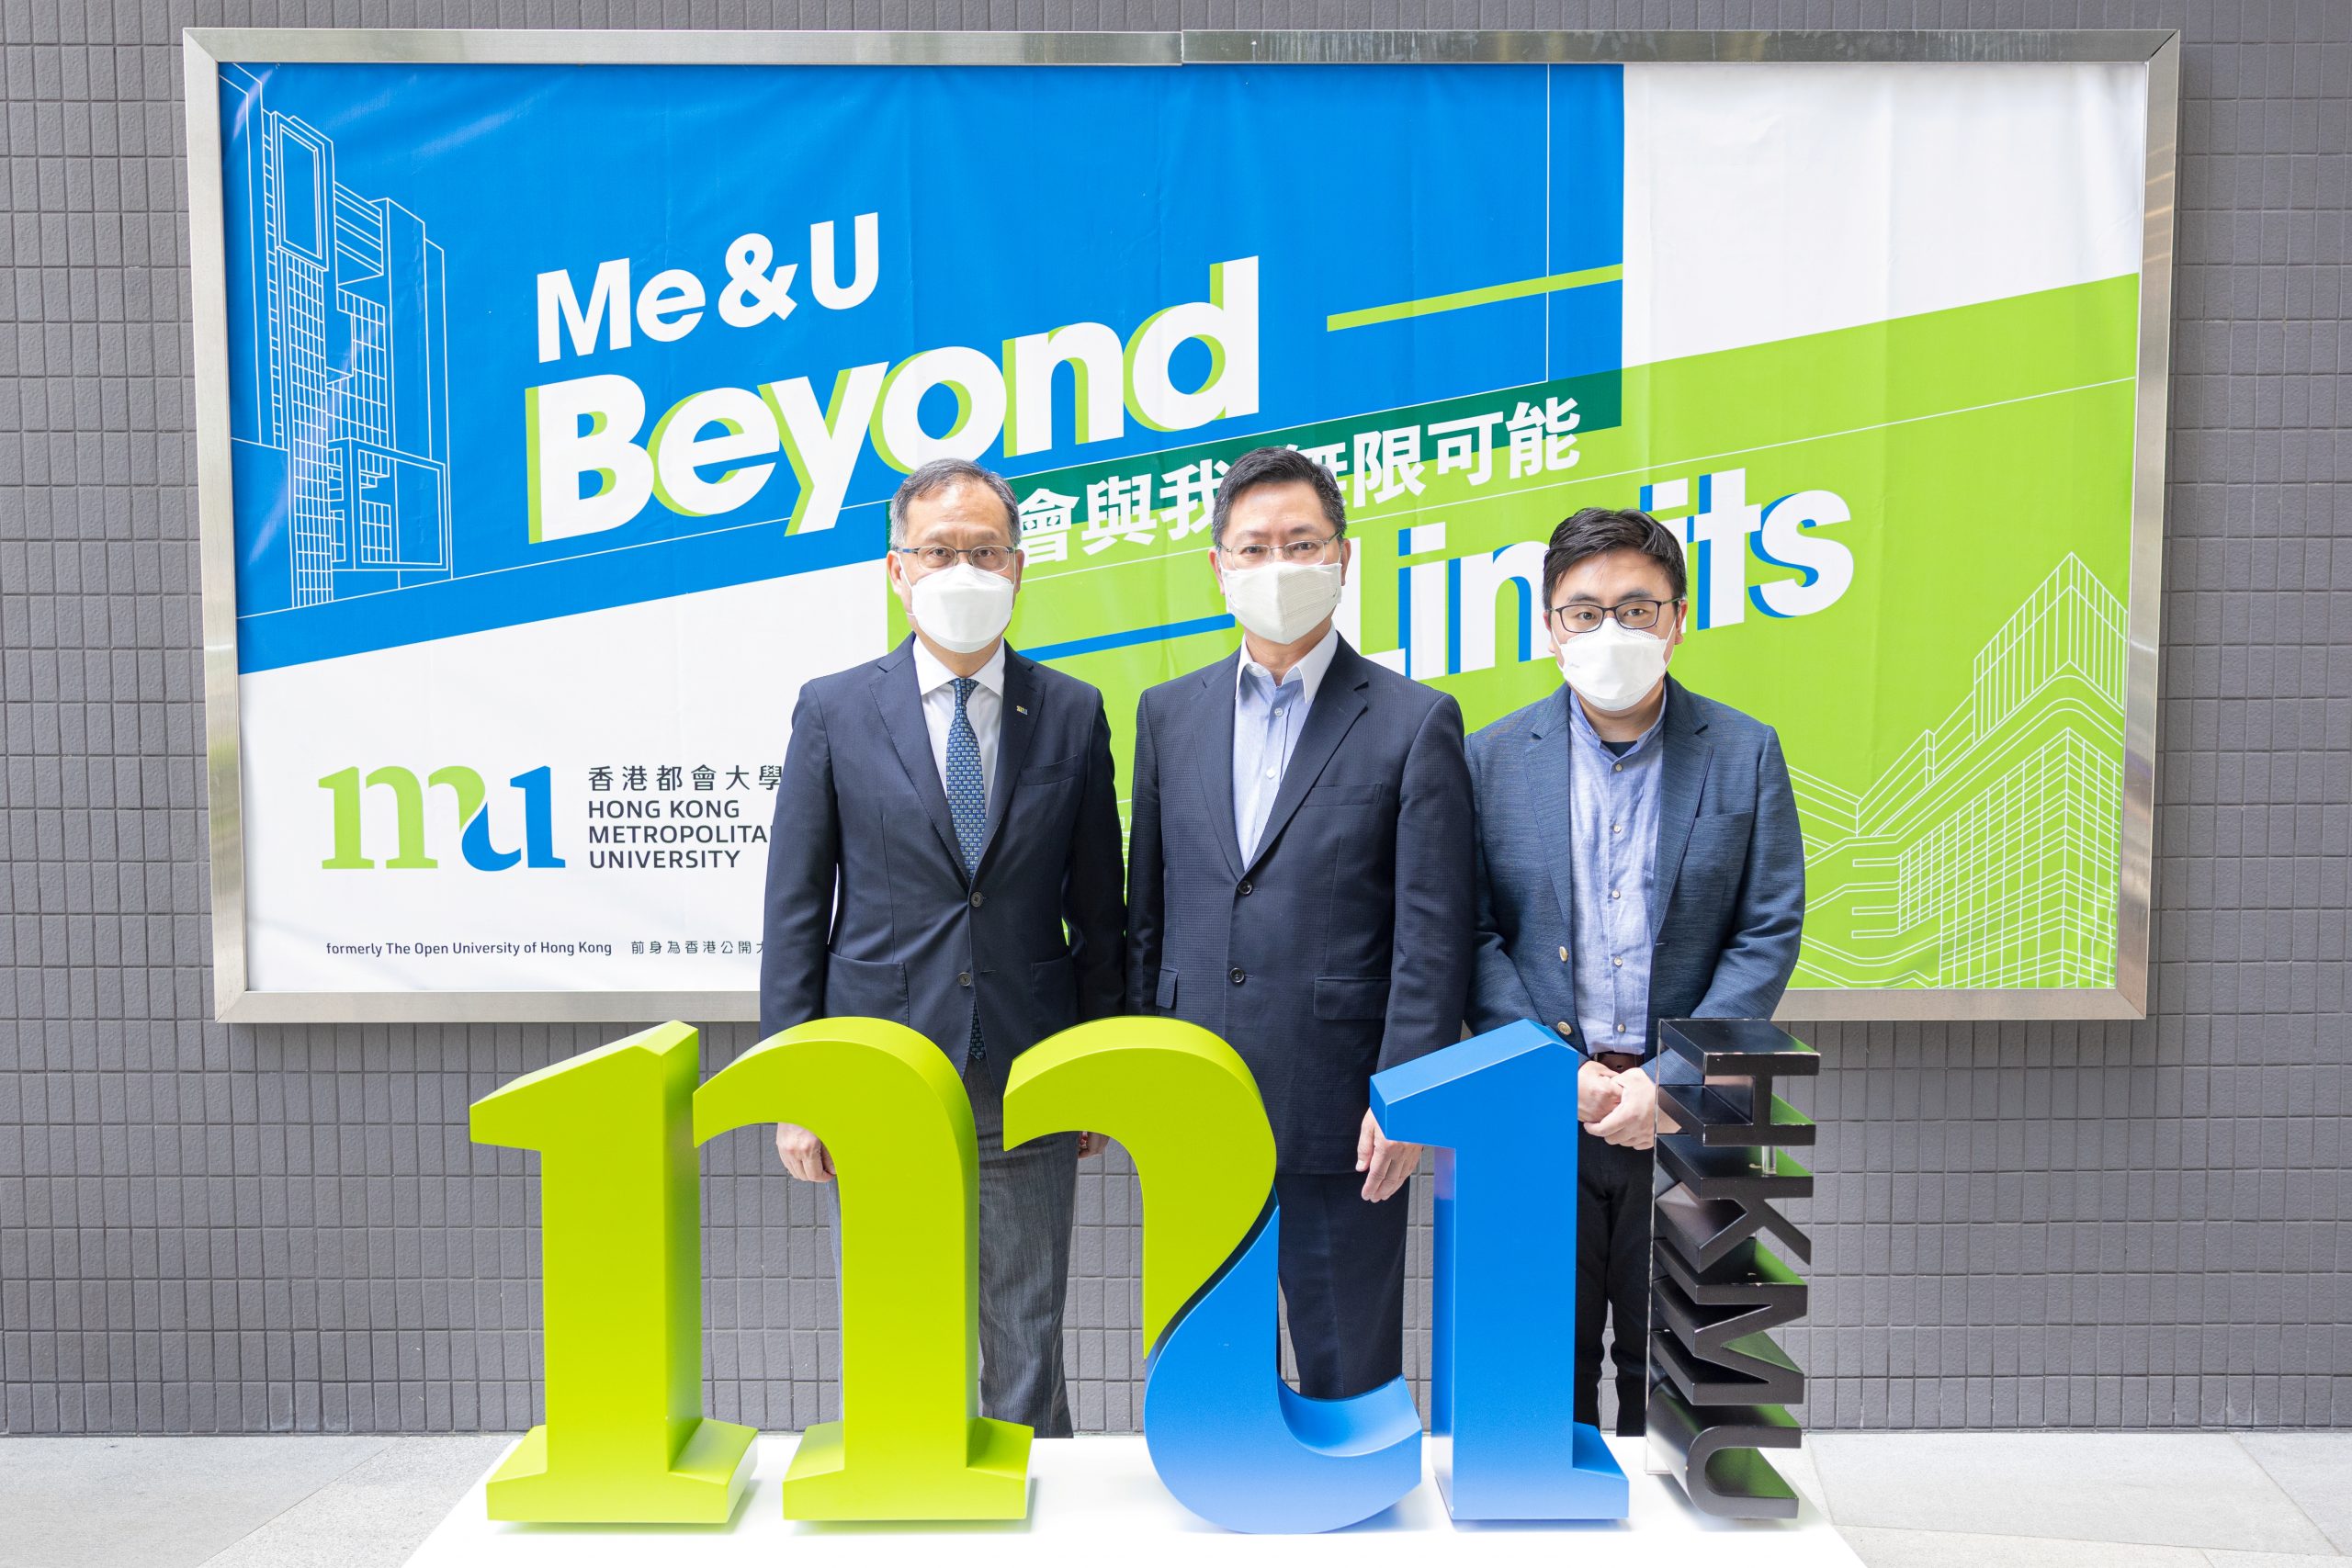 (From left) A group photo of HKMU President Prof. Paul Lam Kwan-sing, Secretary for Innovation and Technology Mr Alfred Sit Wing-hang, and the Founder & CEO of C-POLAR Biotech Limited Mr Aldrin Or.